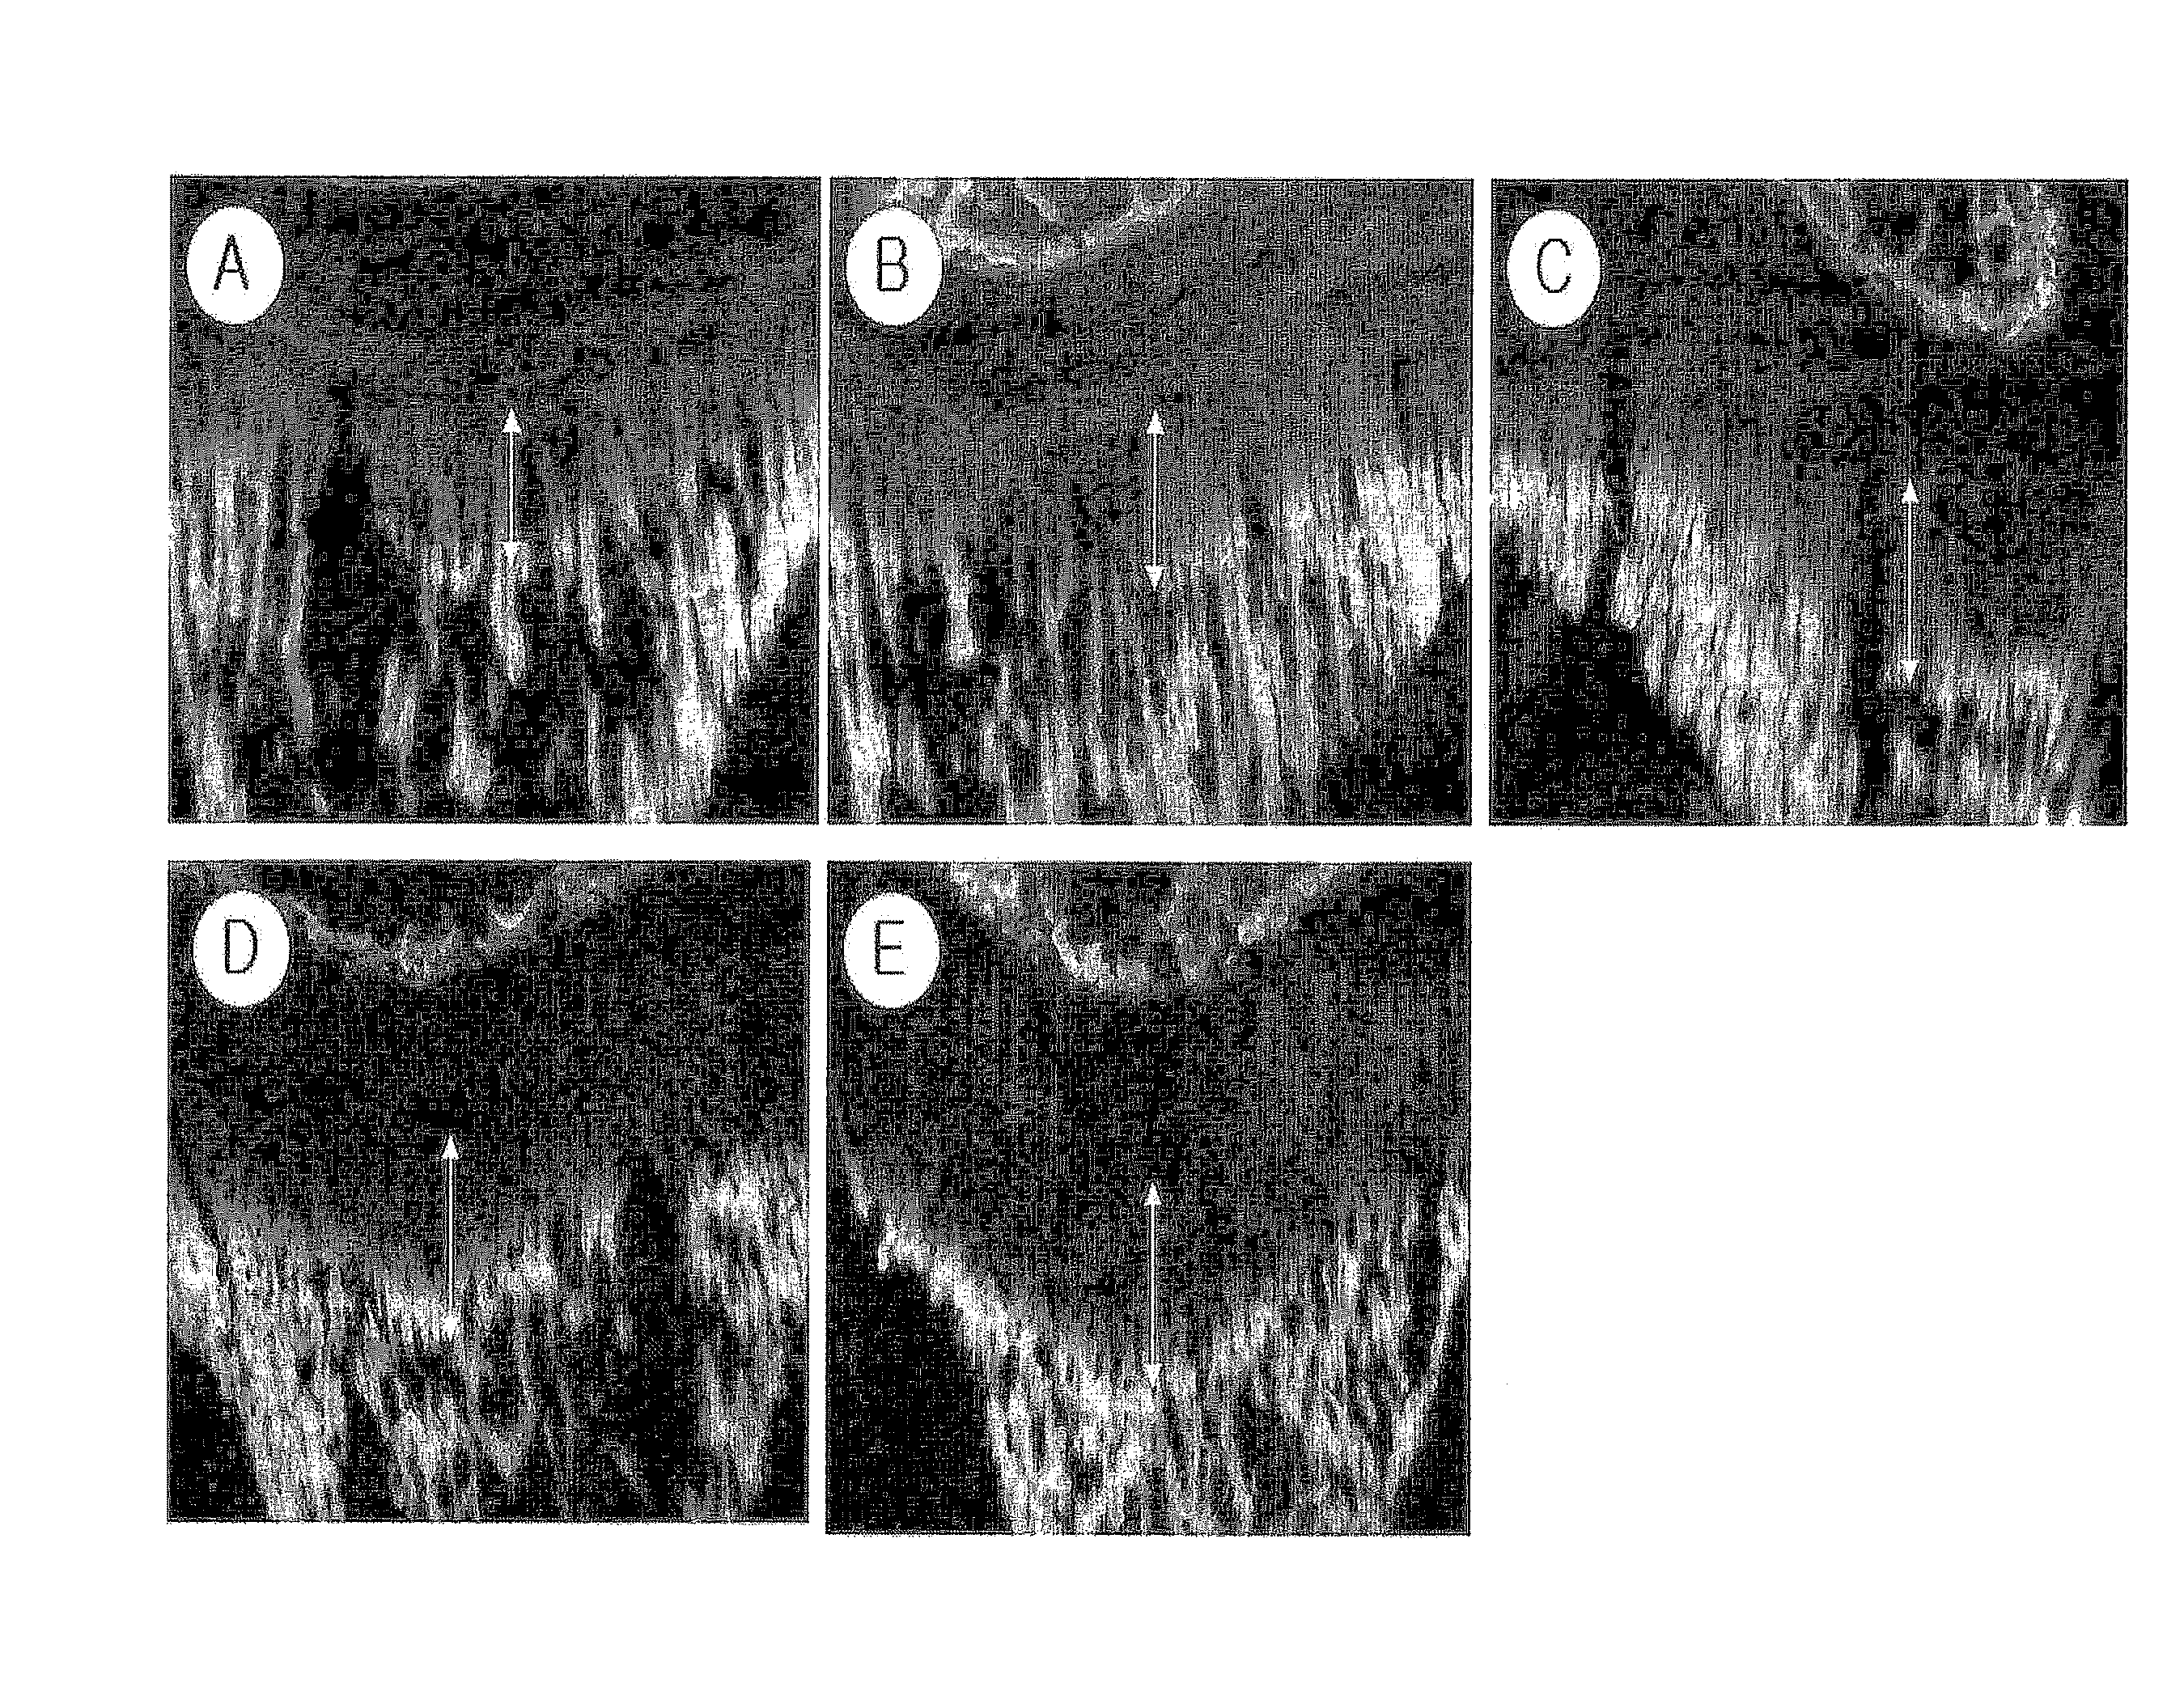 Composition comprising the extract of crude drug complex for stimulating bone growth